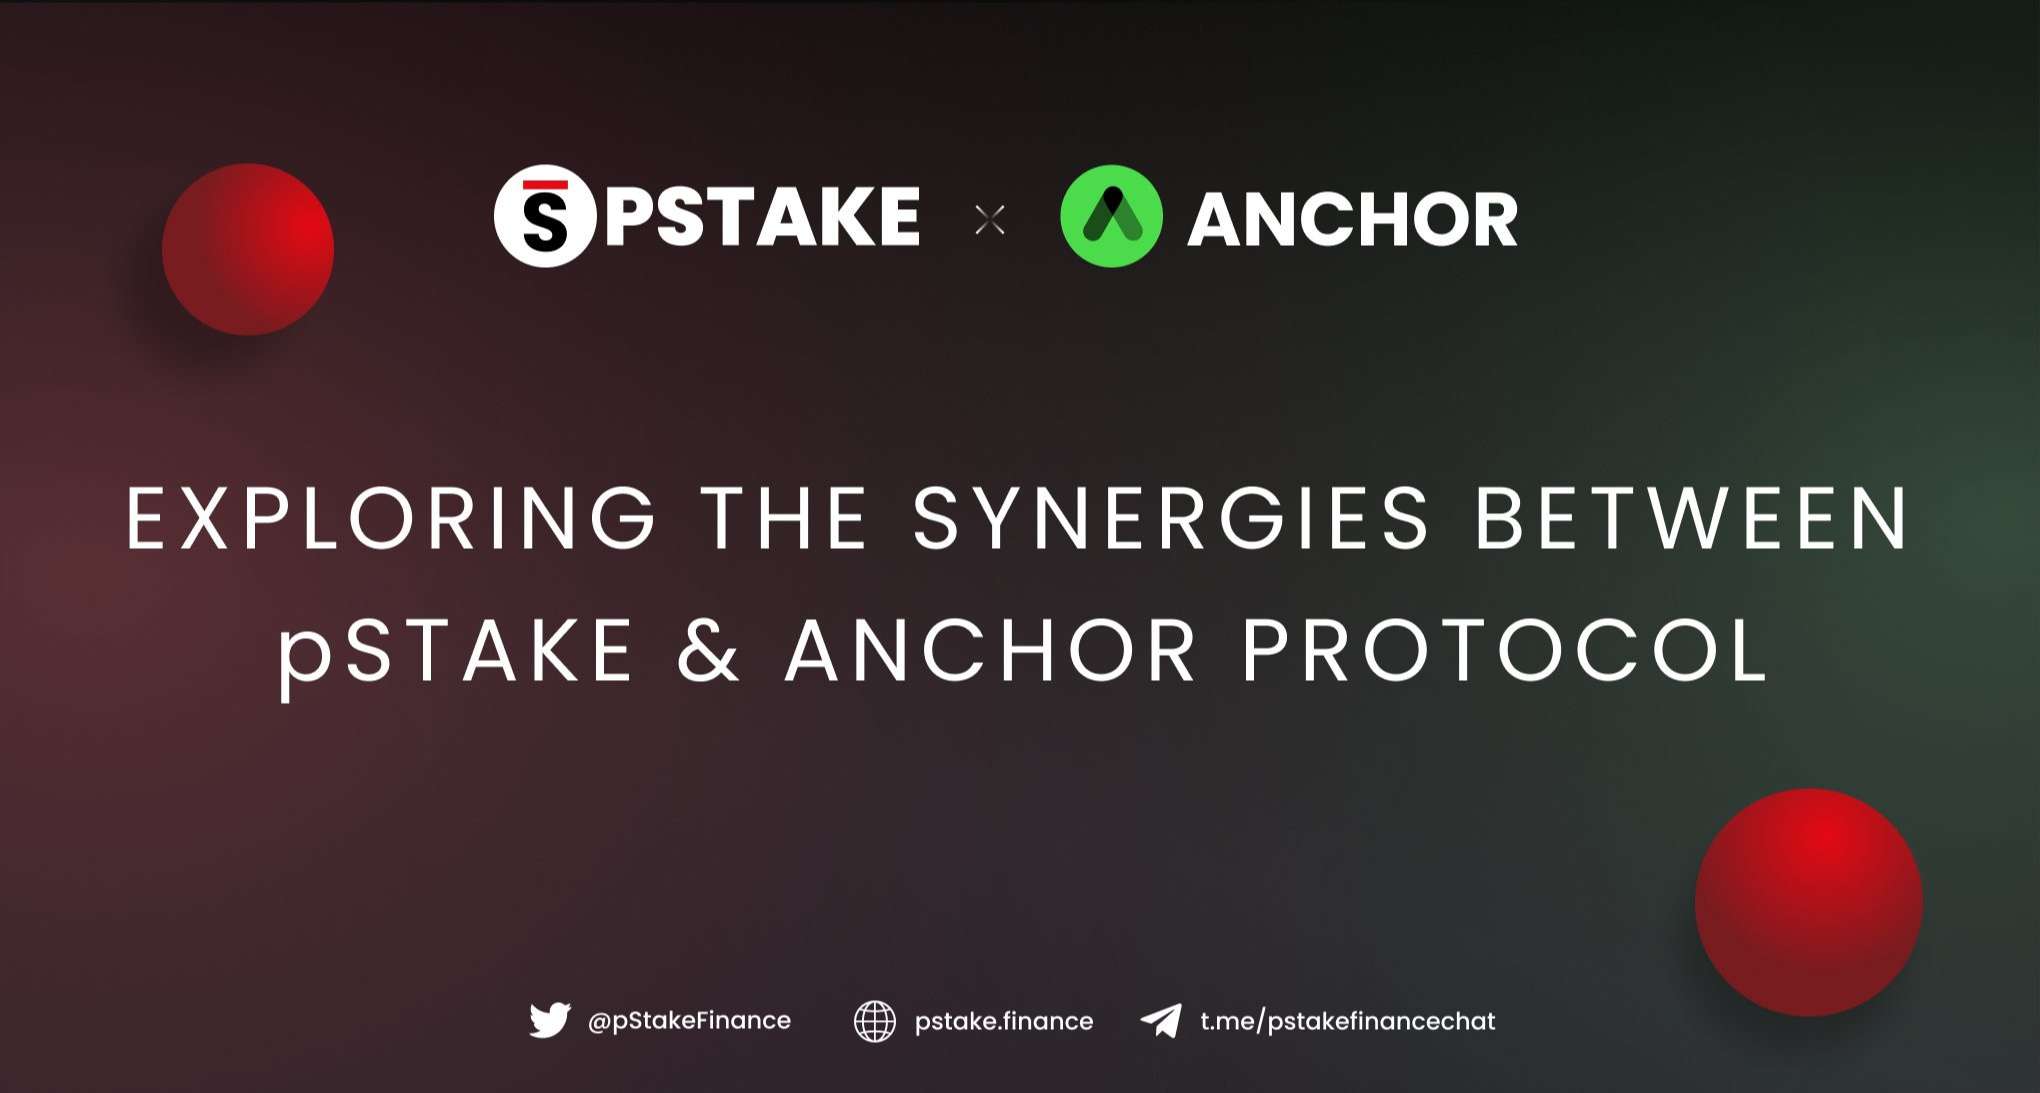 PSTAKE partners with Anchor